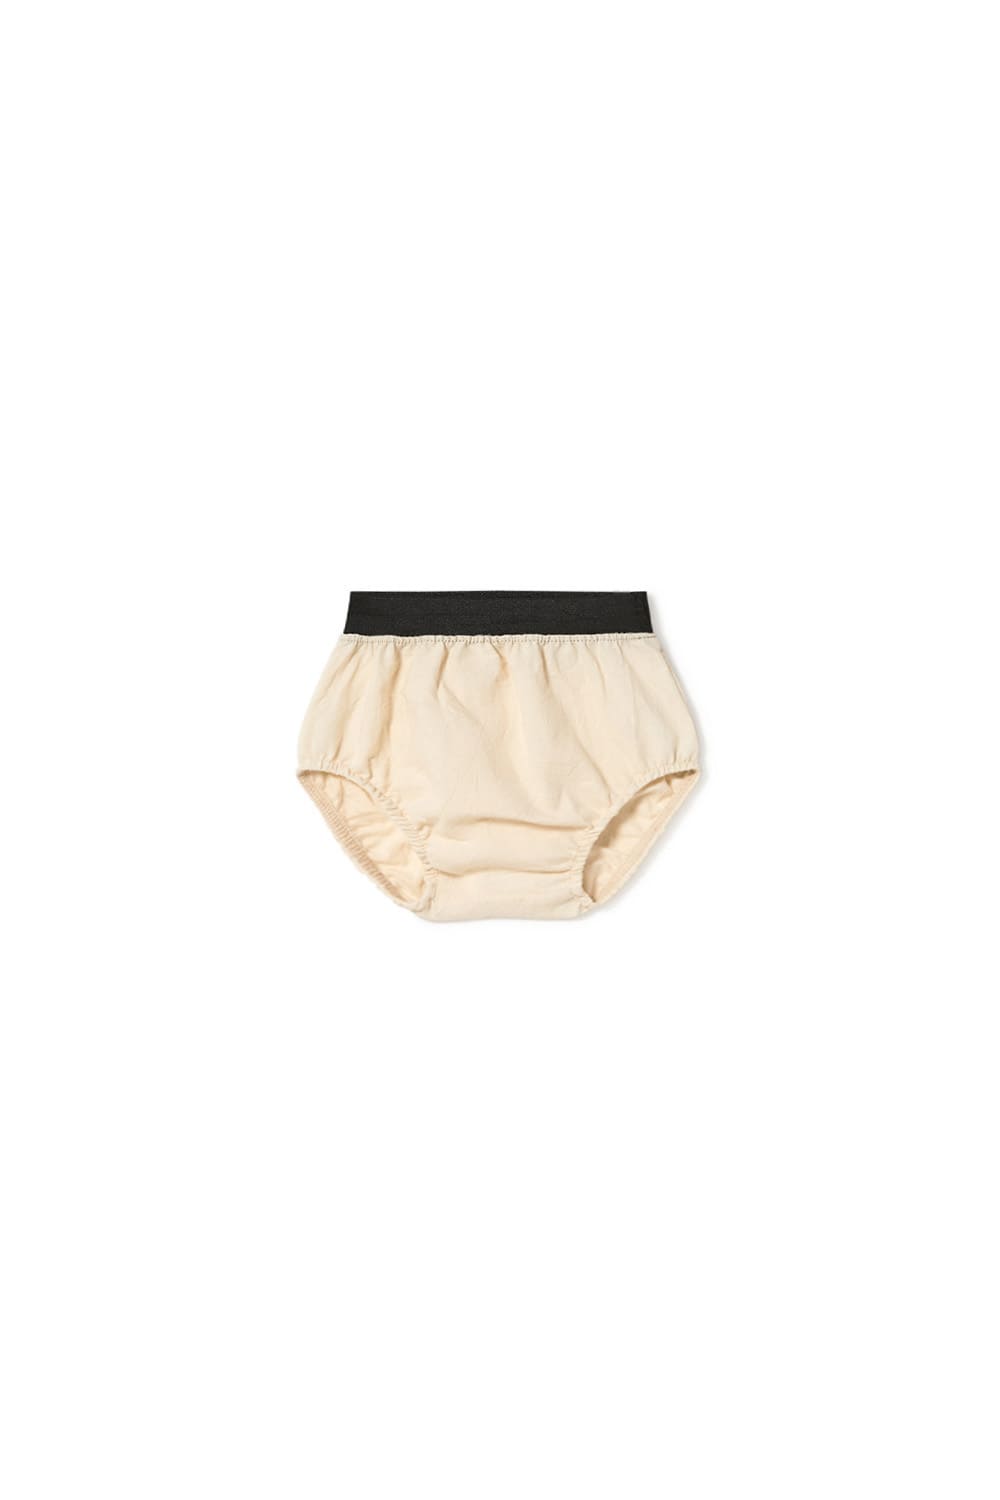 Little Creative Factory Crinkled Bloomers - Off White